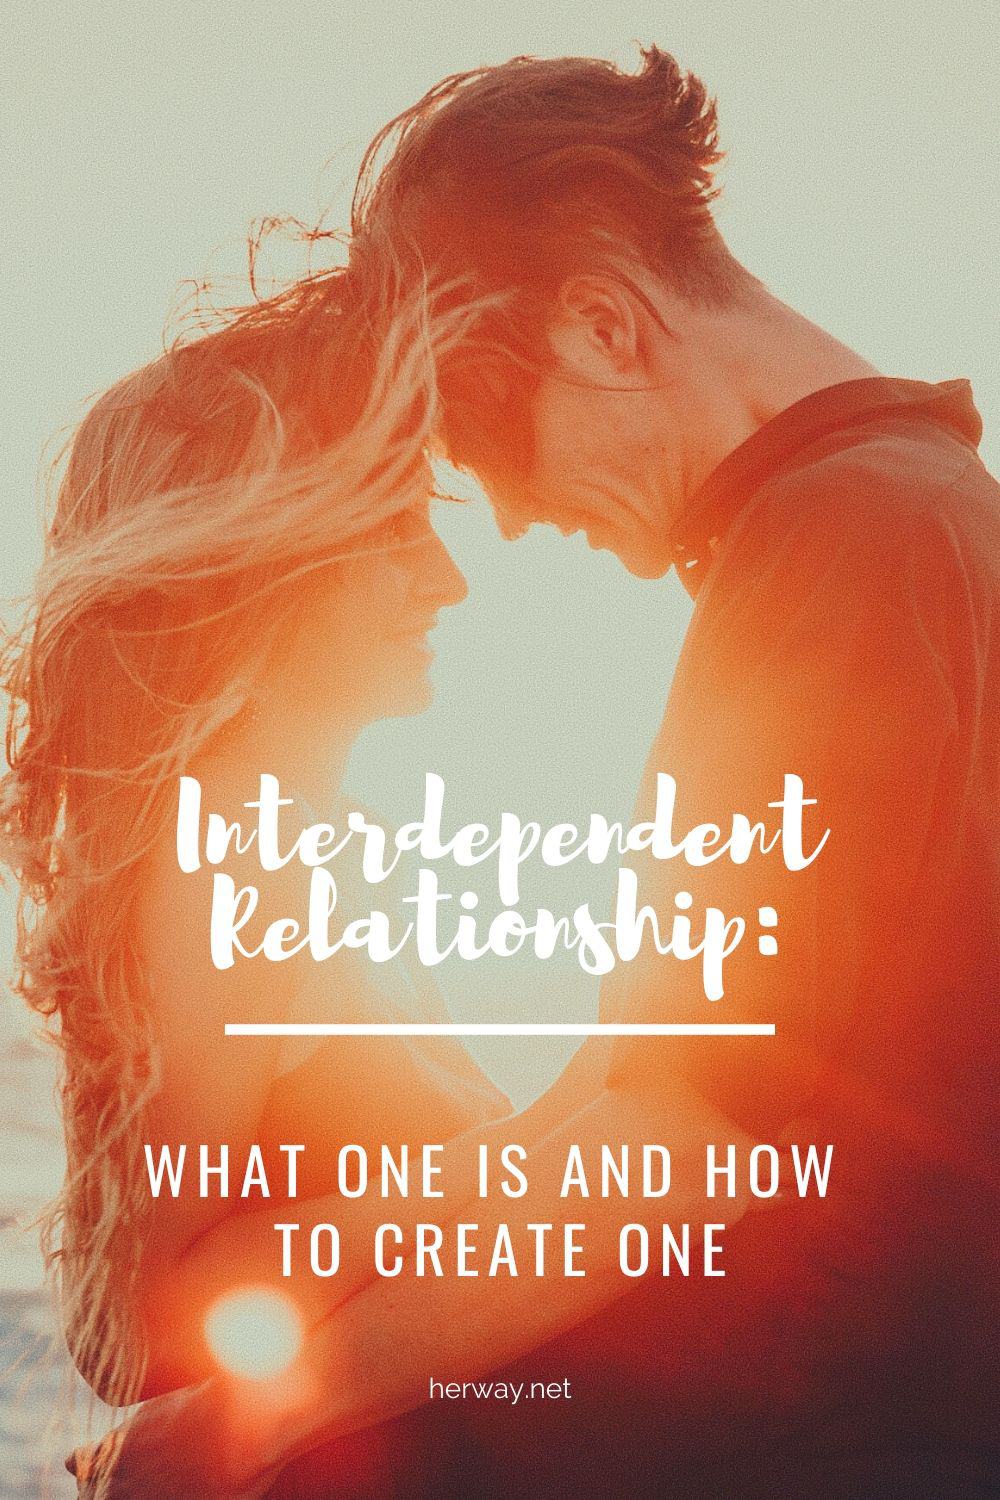 Interdependent Relationship: What One Is And How To Create One